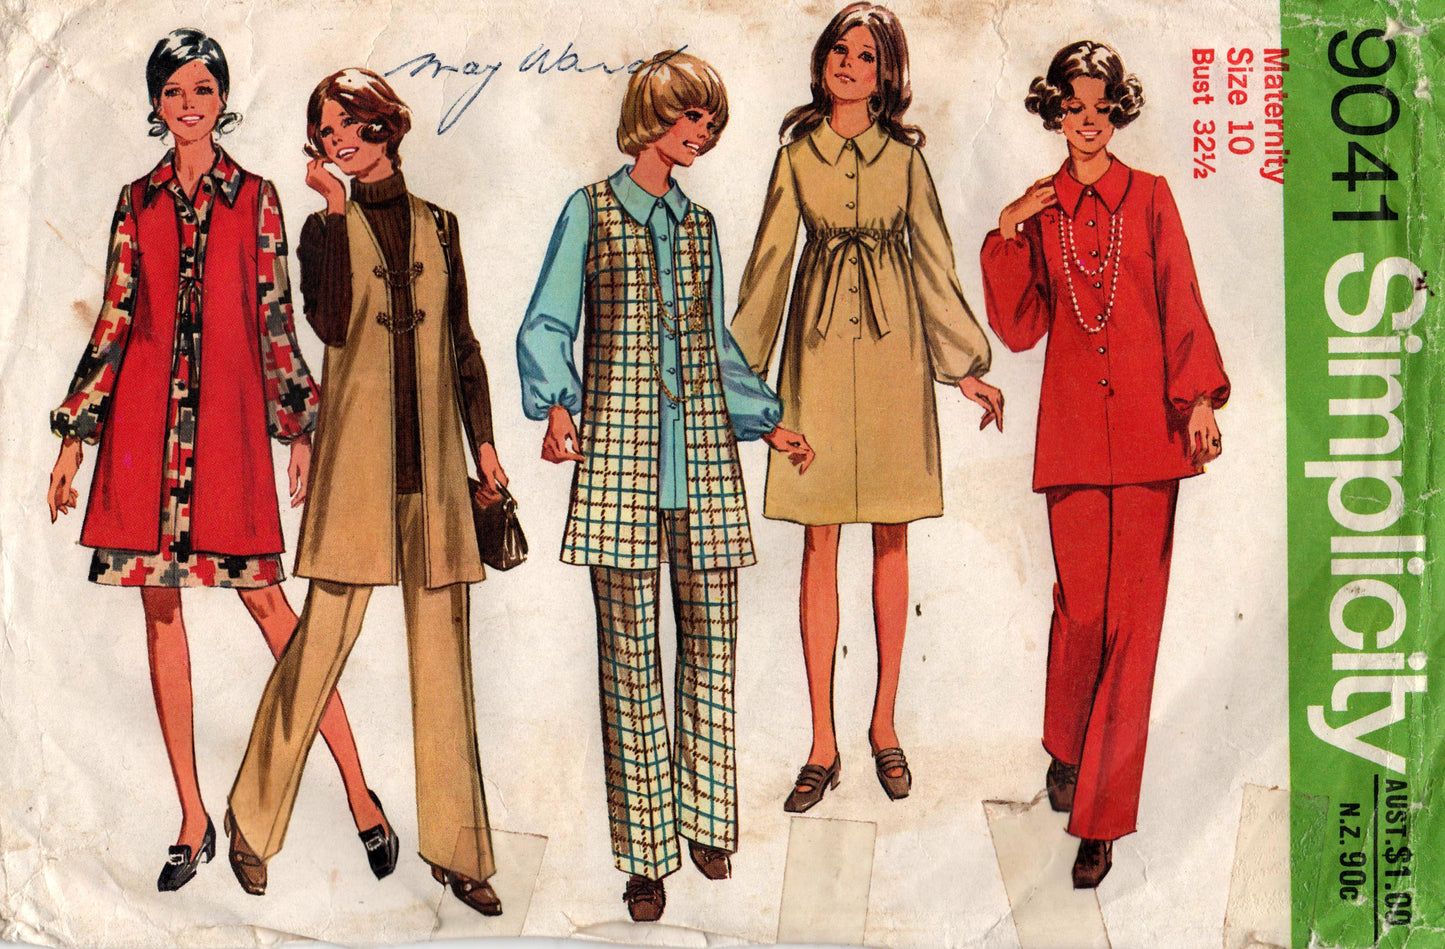 Simplicity 9041 Maternity Puffy Sleeved Dress Tunic Vest & Pants 1970s Vintage Sewing Pattern Size 10 Bust 32.5 inches